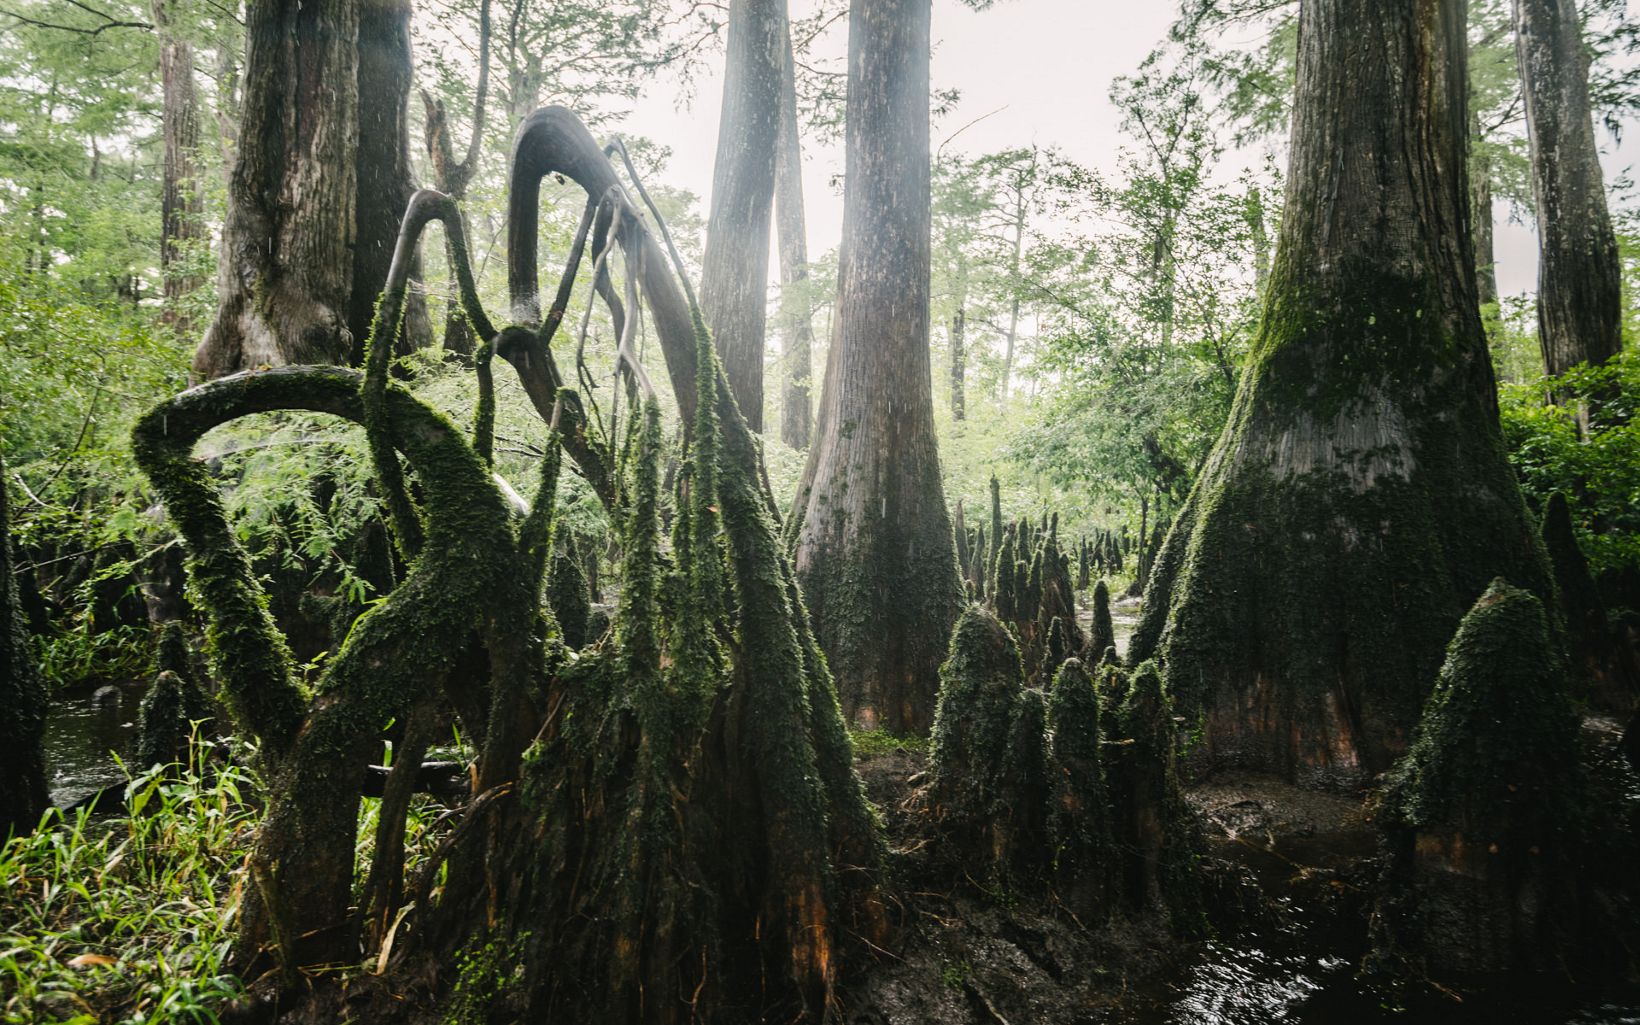 A closeup view of the huge trunks and roots of mossy cypress trees on the Black River.